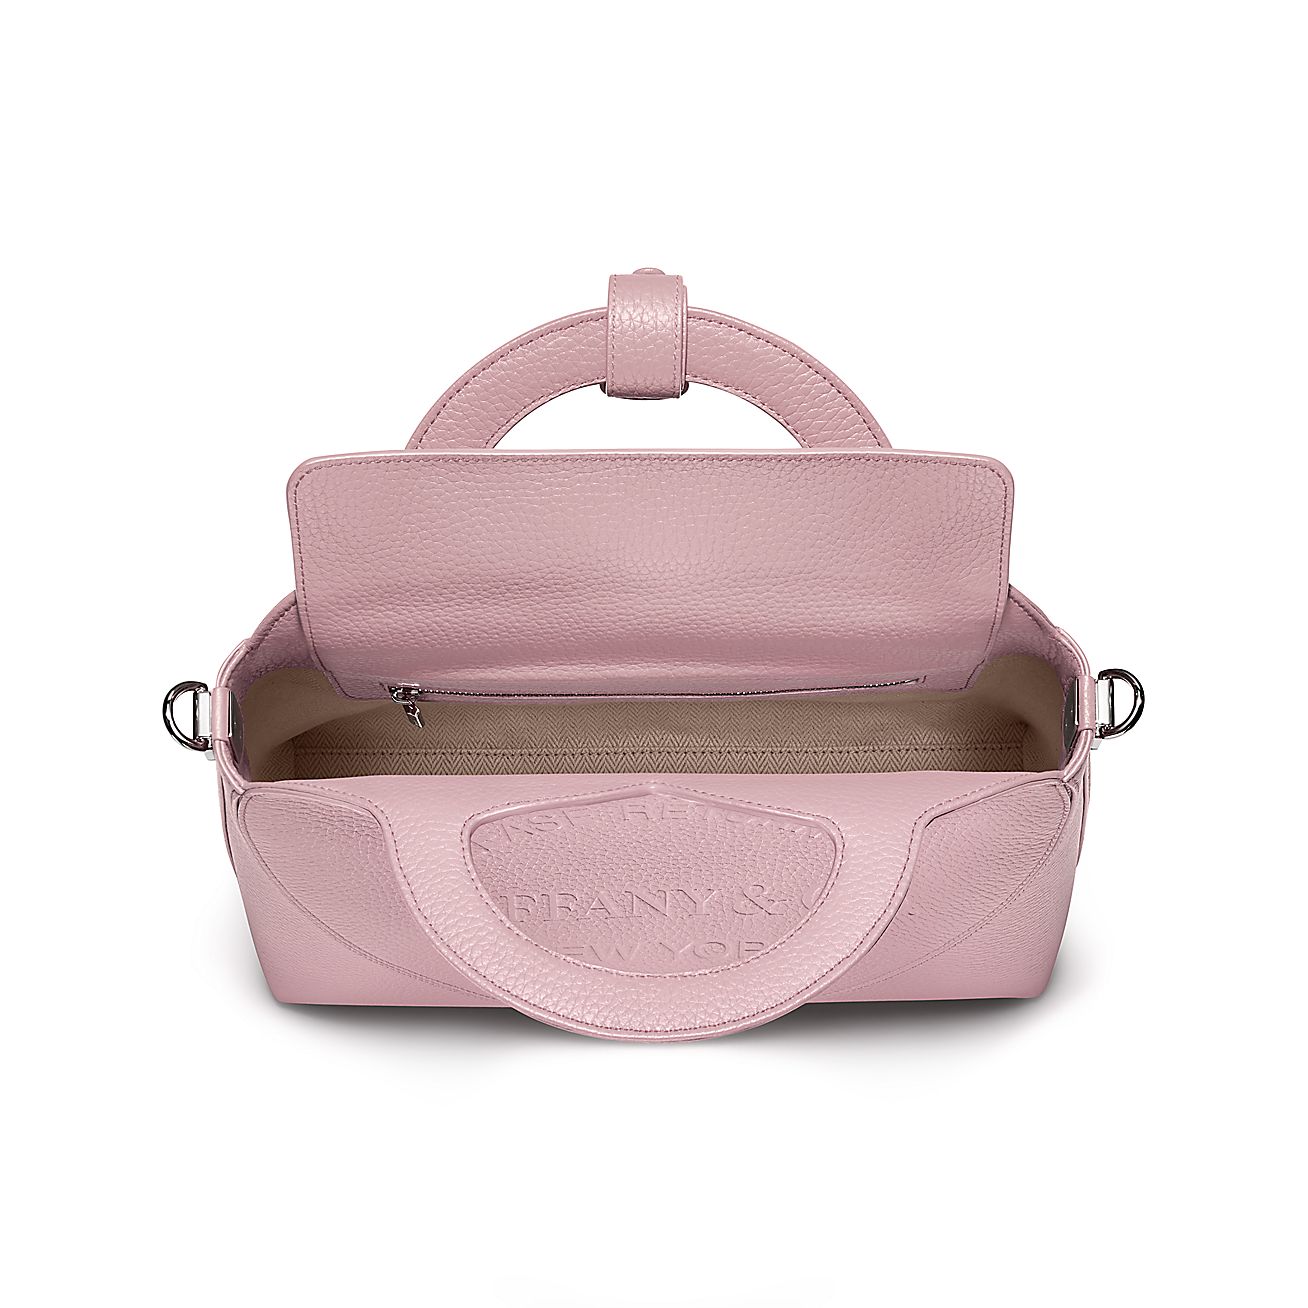 Return to Tiffany® Small Tote Bag in Crystal Pink Leather